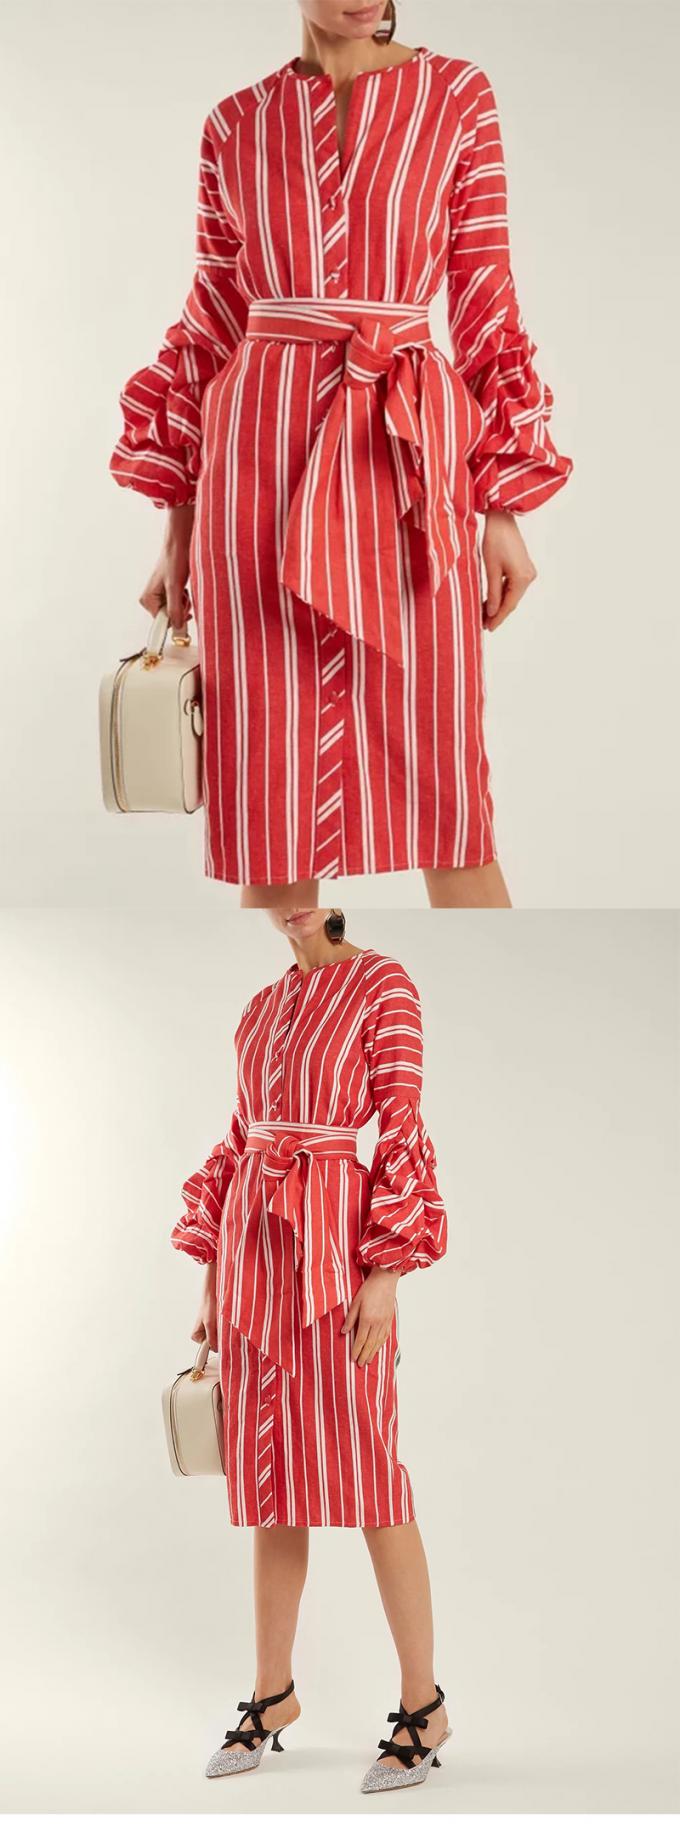 2018 Women Clothes Gathered Bell Sleeves Striped Midi Design Fashion Dresses For Women 2018 2